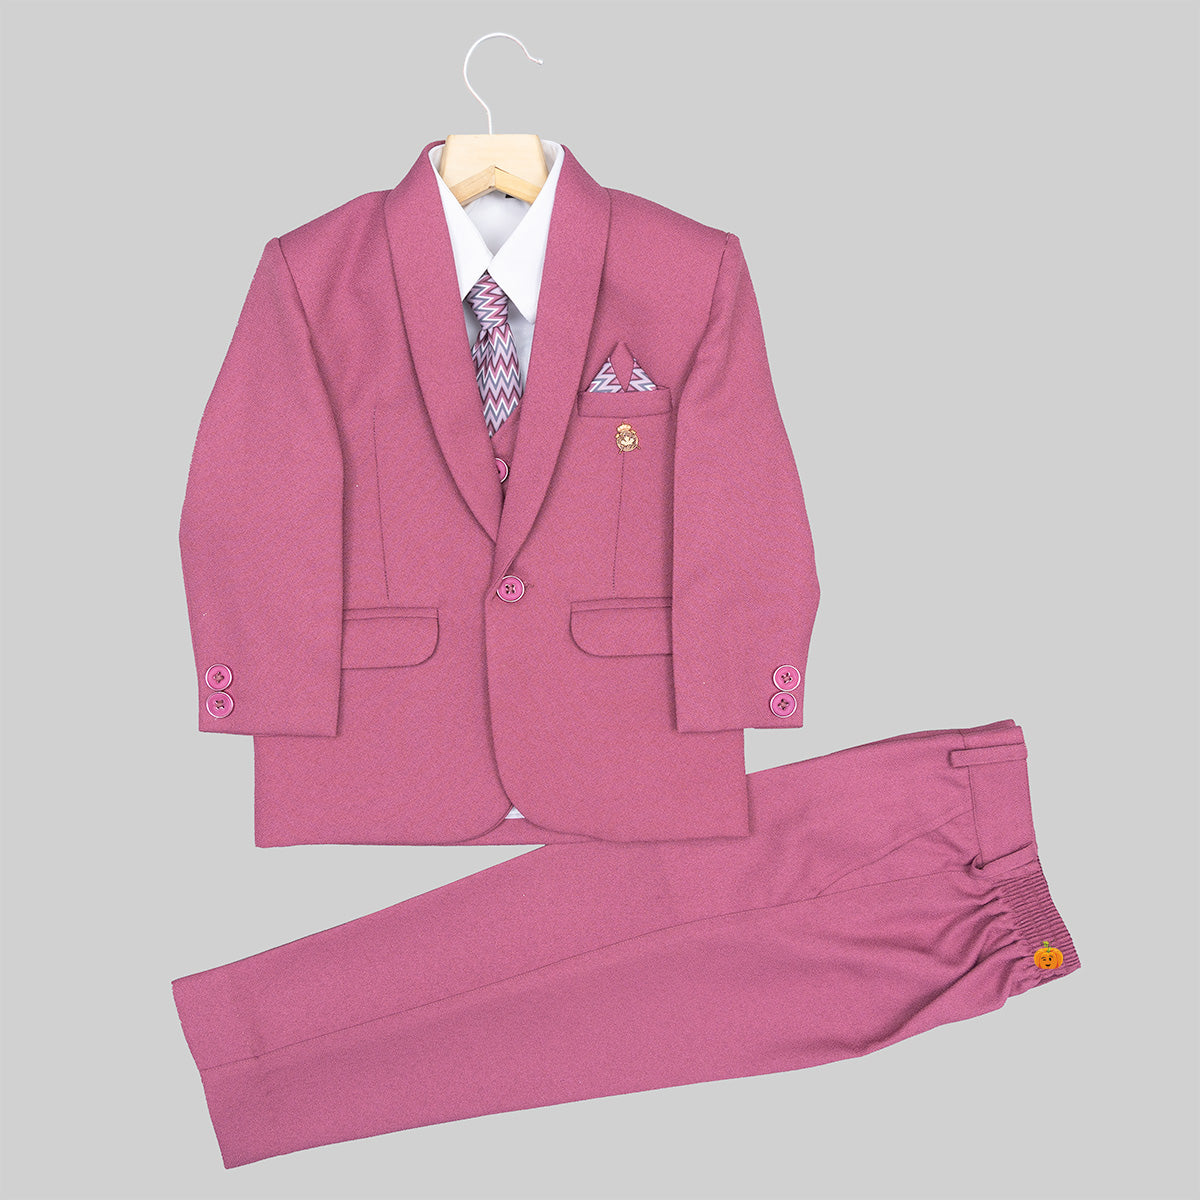 NNNOW.com Sale - arrow 4 piece suit - Shop Online at Lowest Price in India